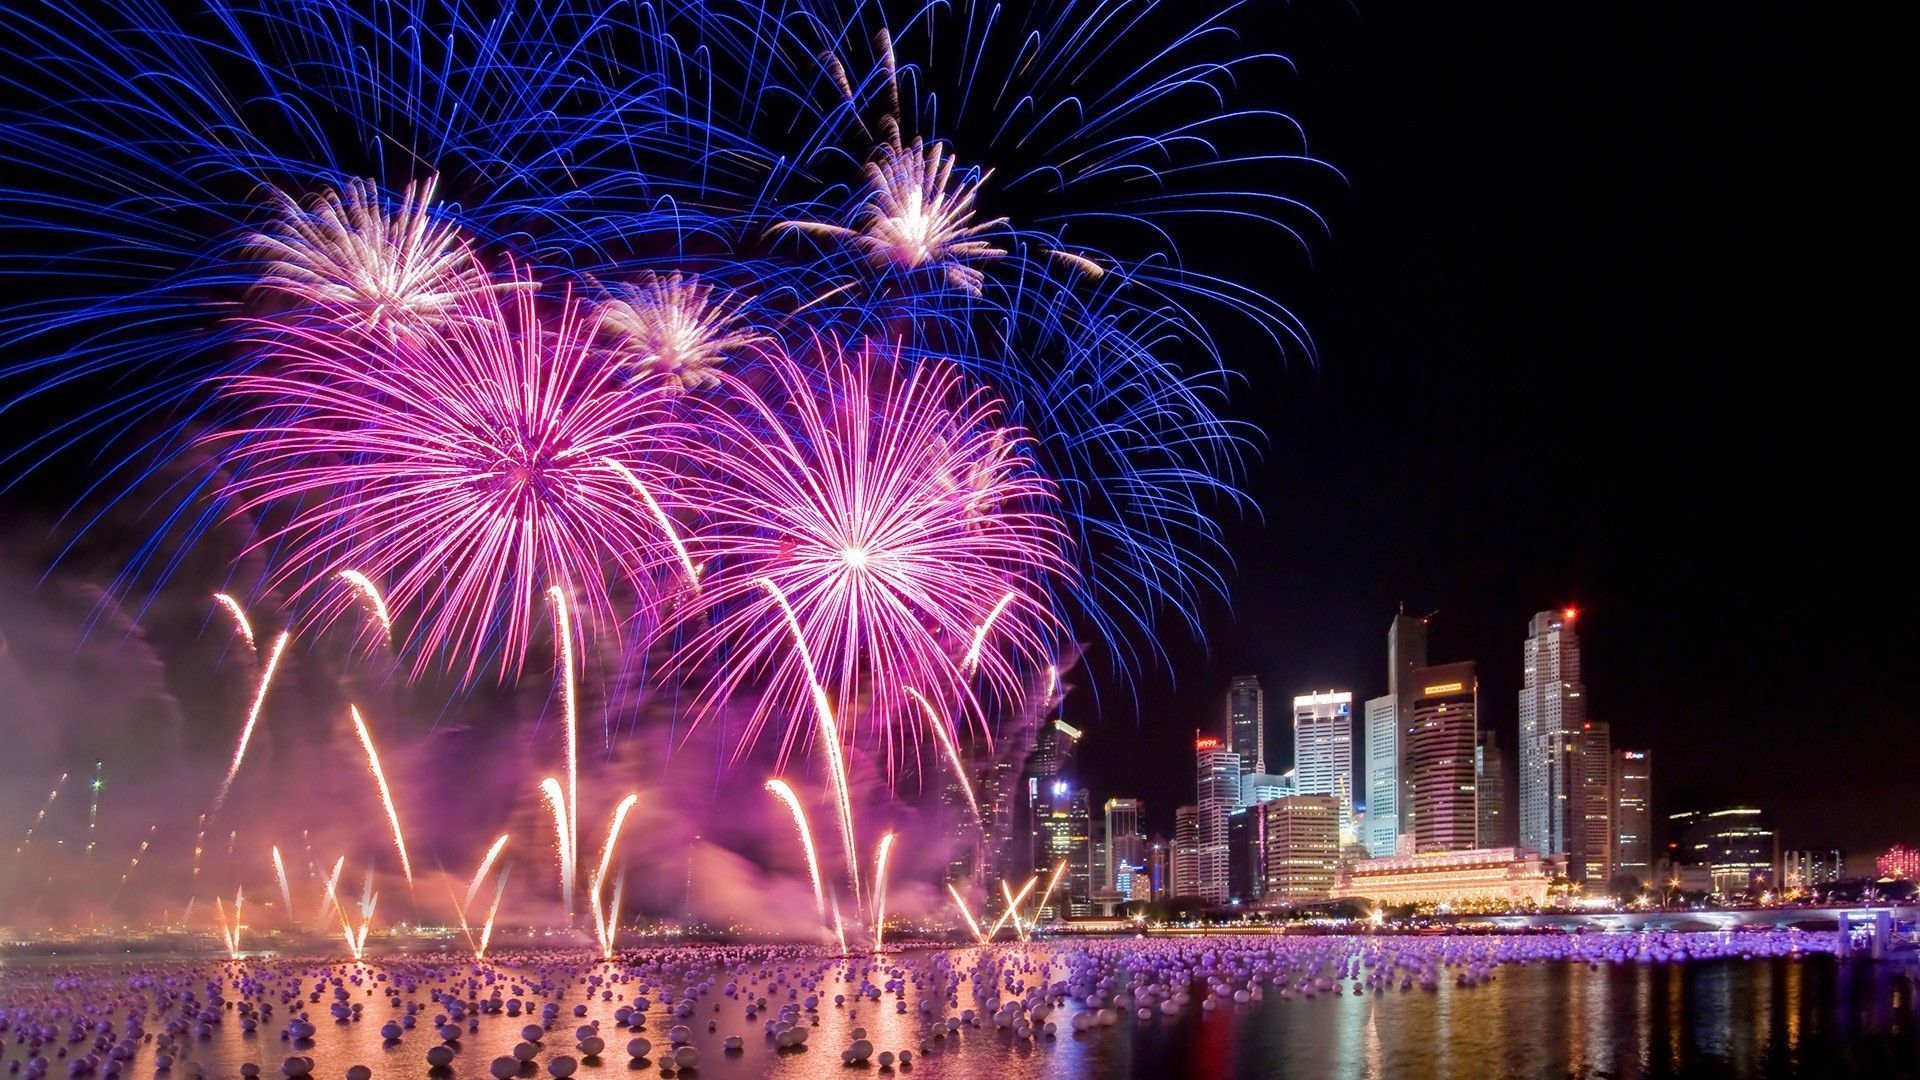 Download Wallpaper 1920x1080 City, Holiday, Night, Sky, Fireworks ...